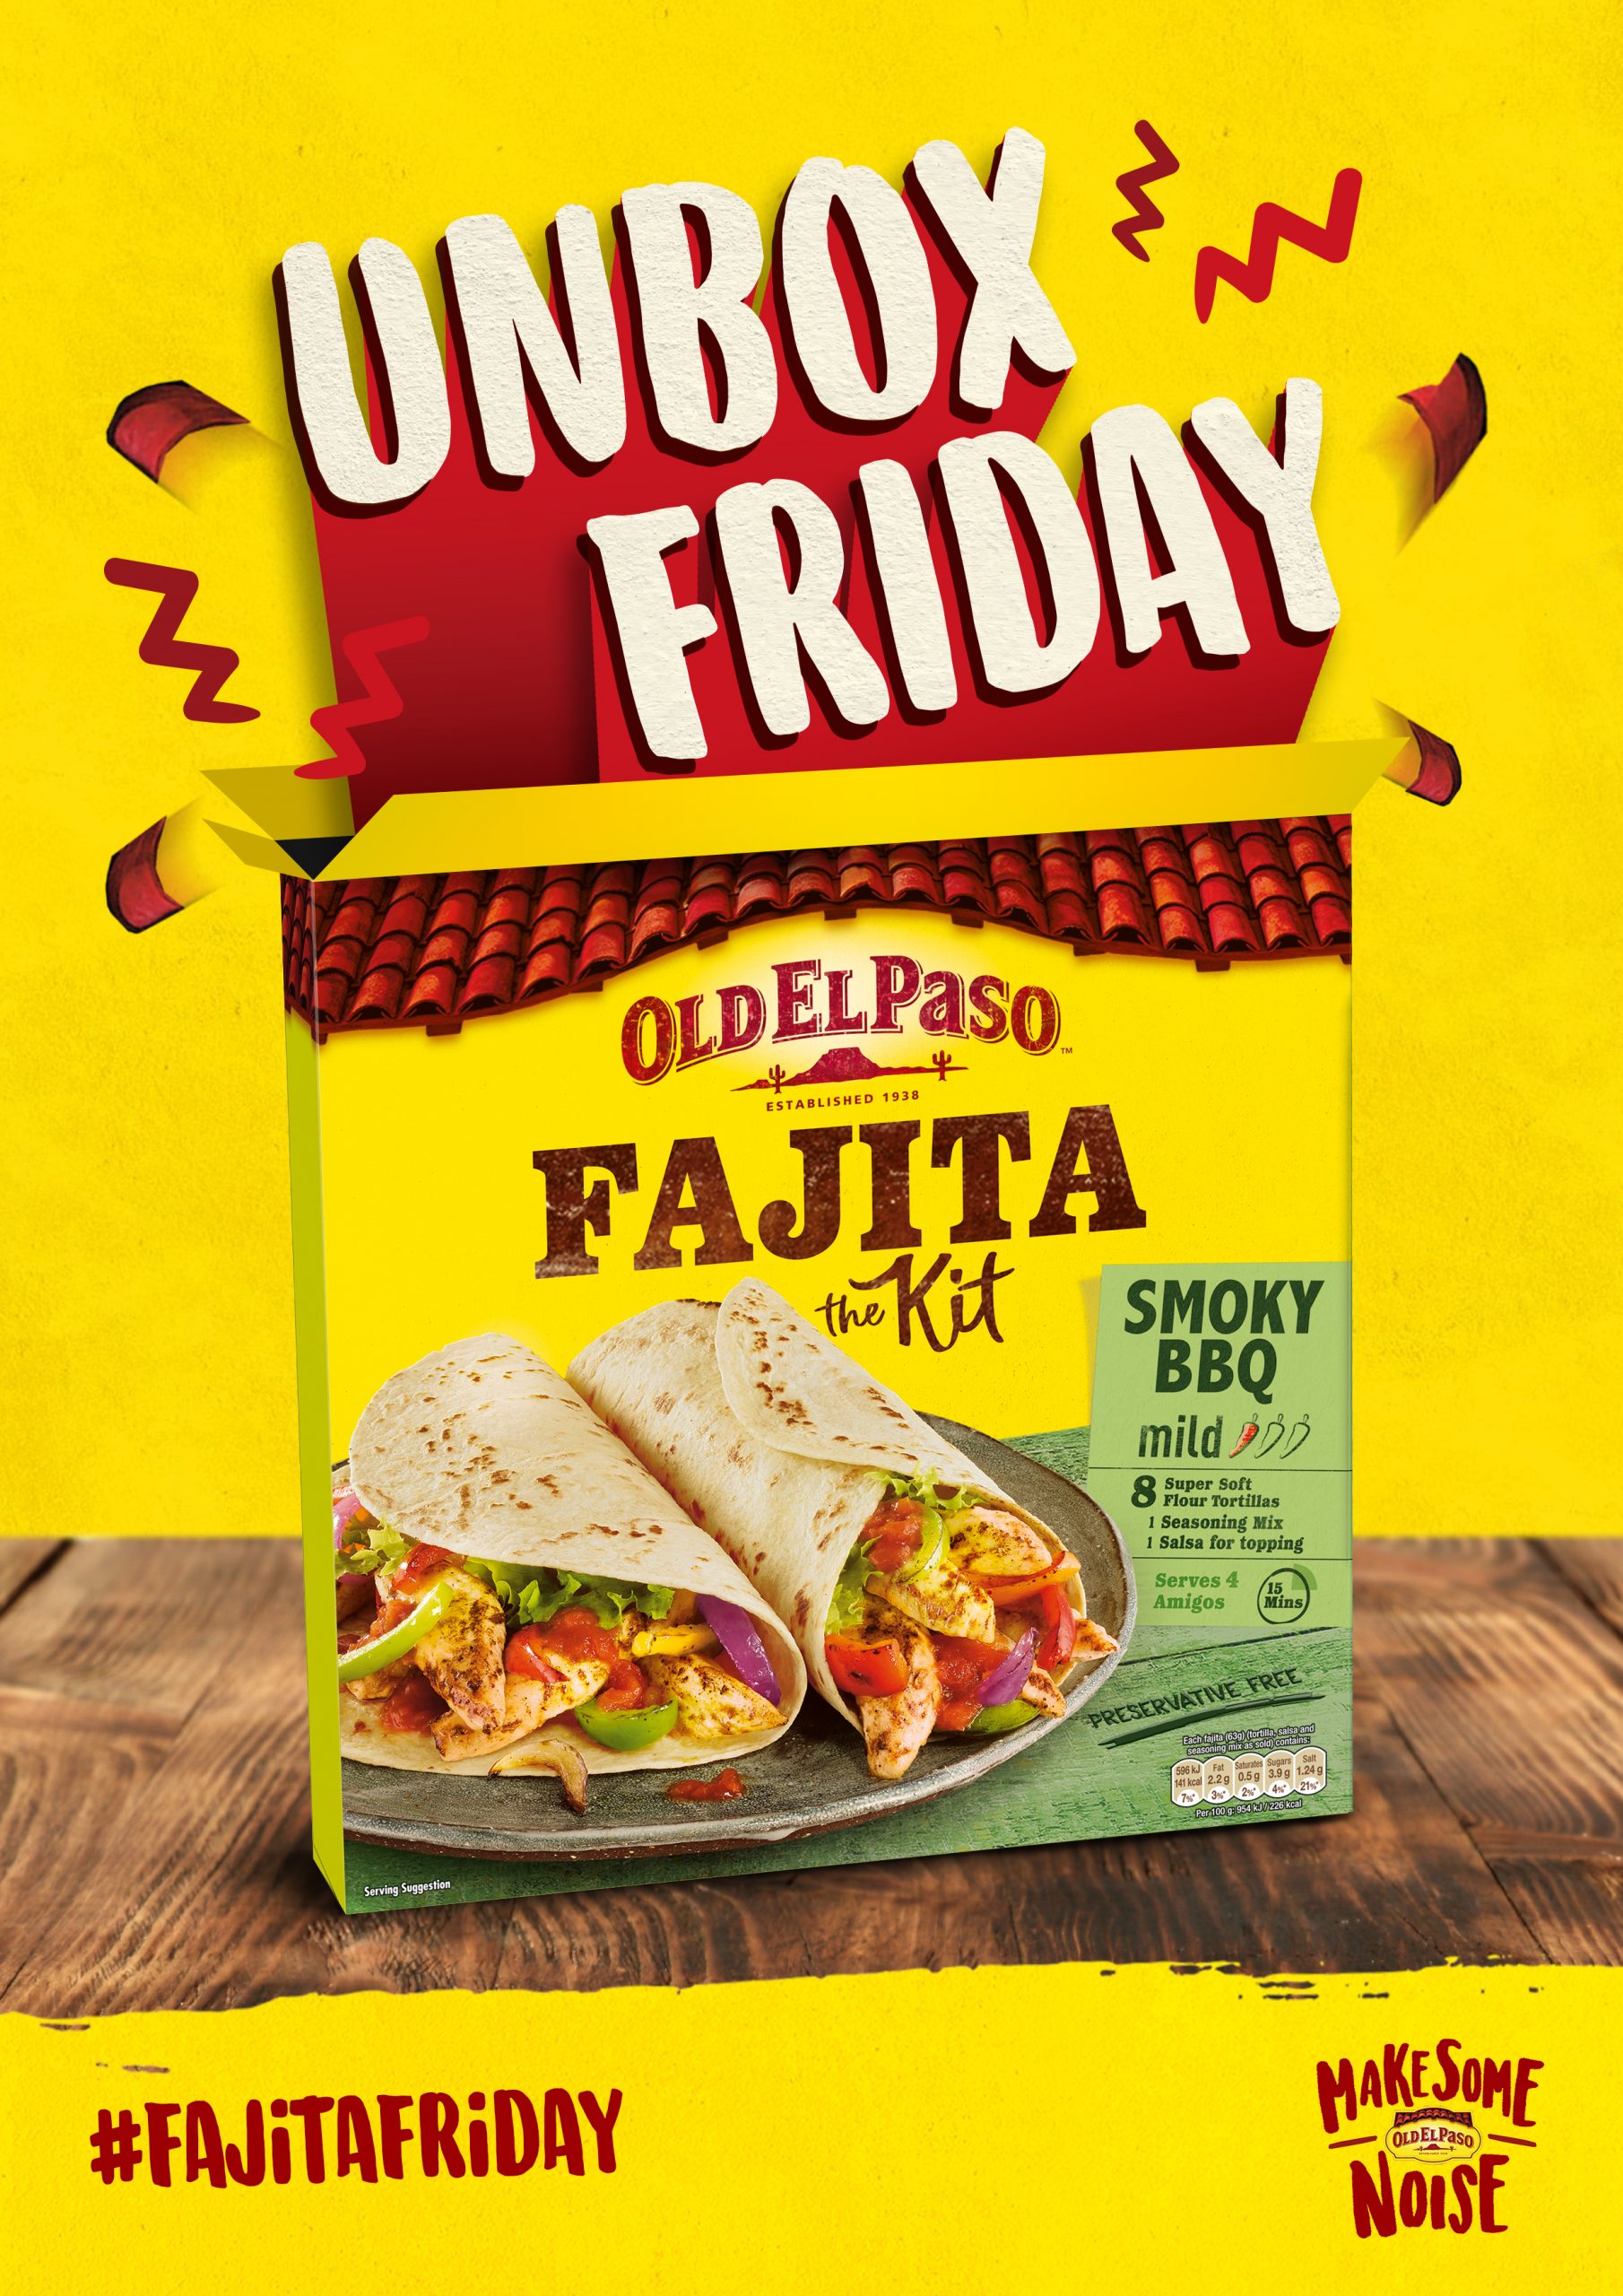 Old El Paso encourages nation to ‘Unbox Friday’ with new campaign